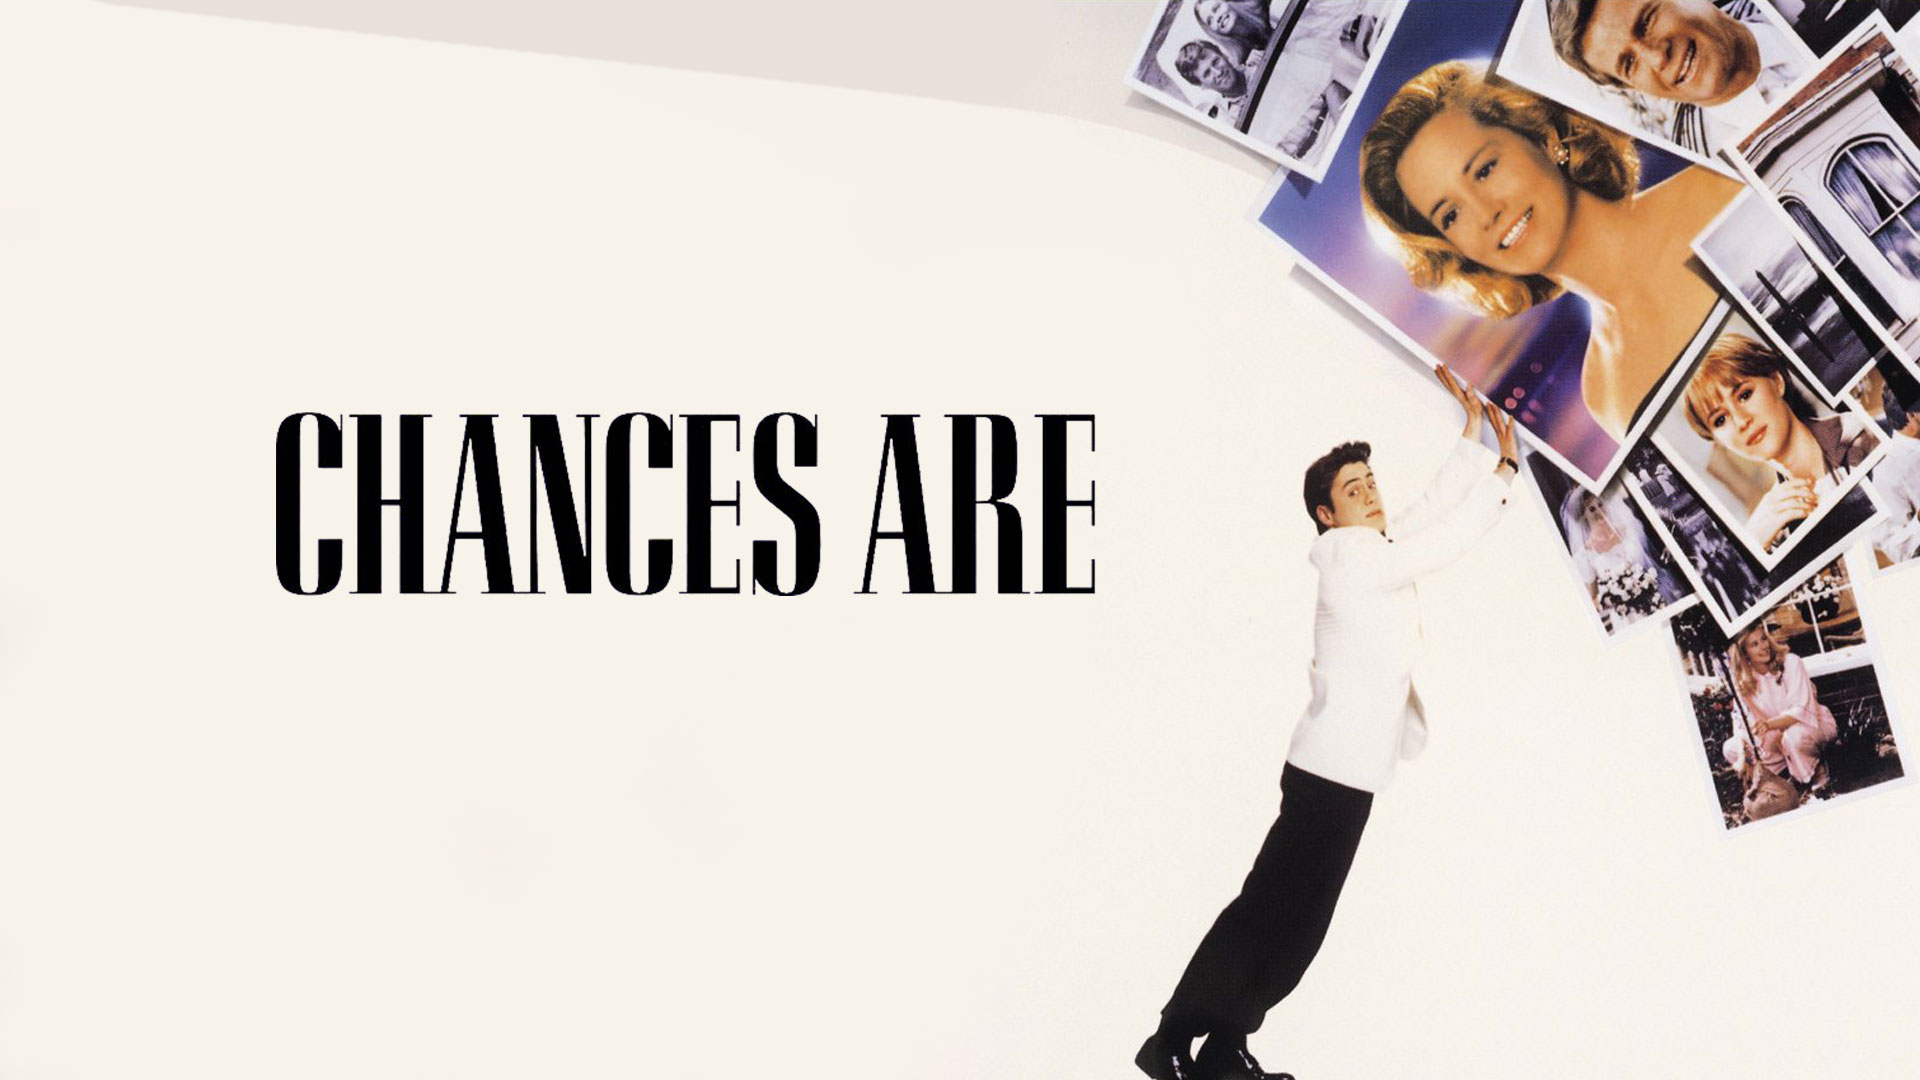 37-facts-about-the-movie-chances-are